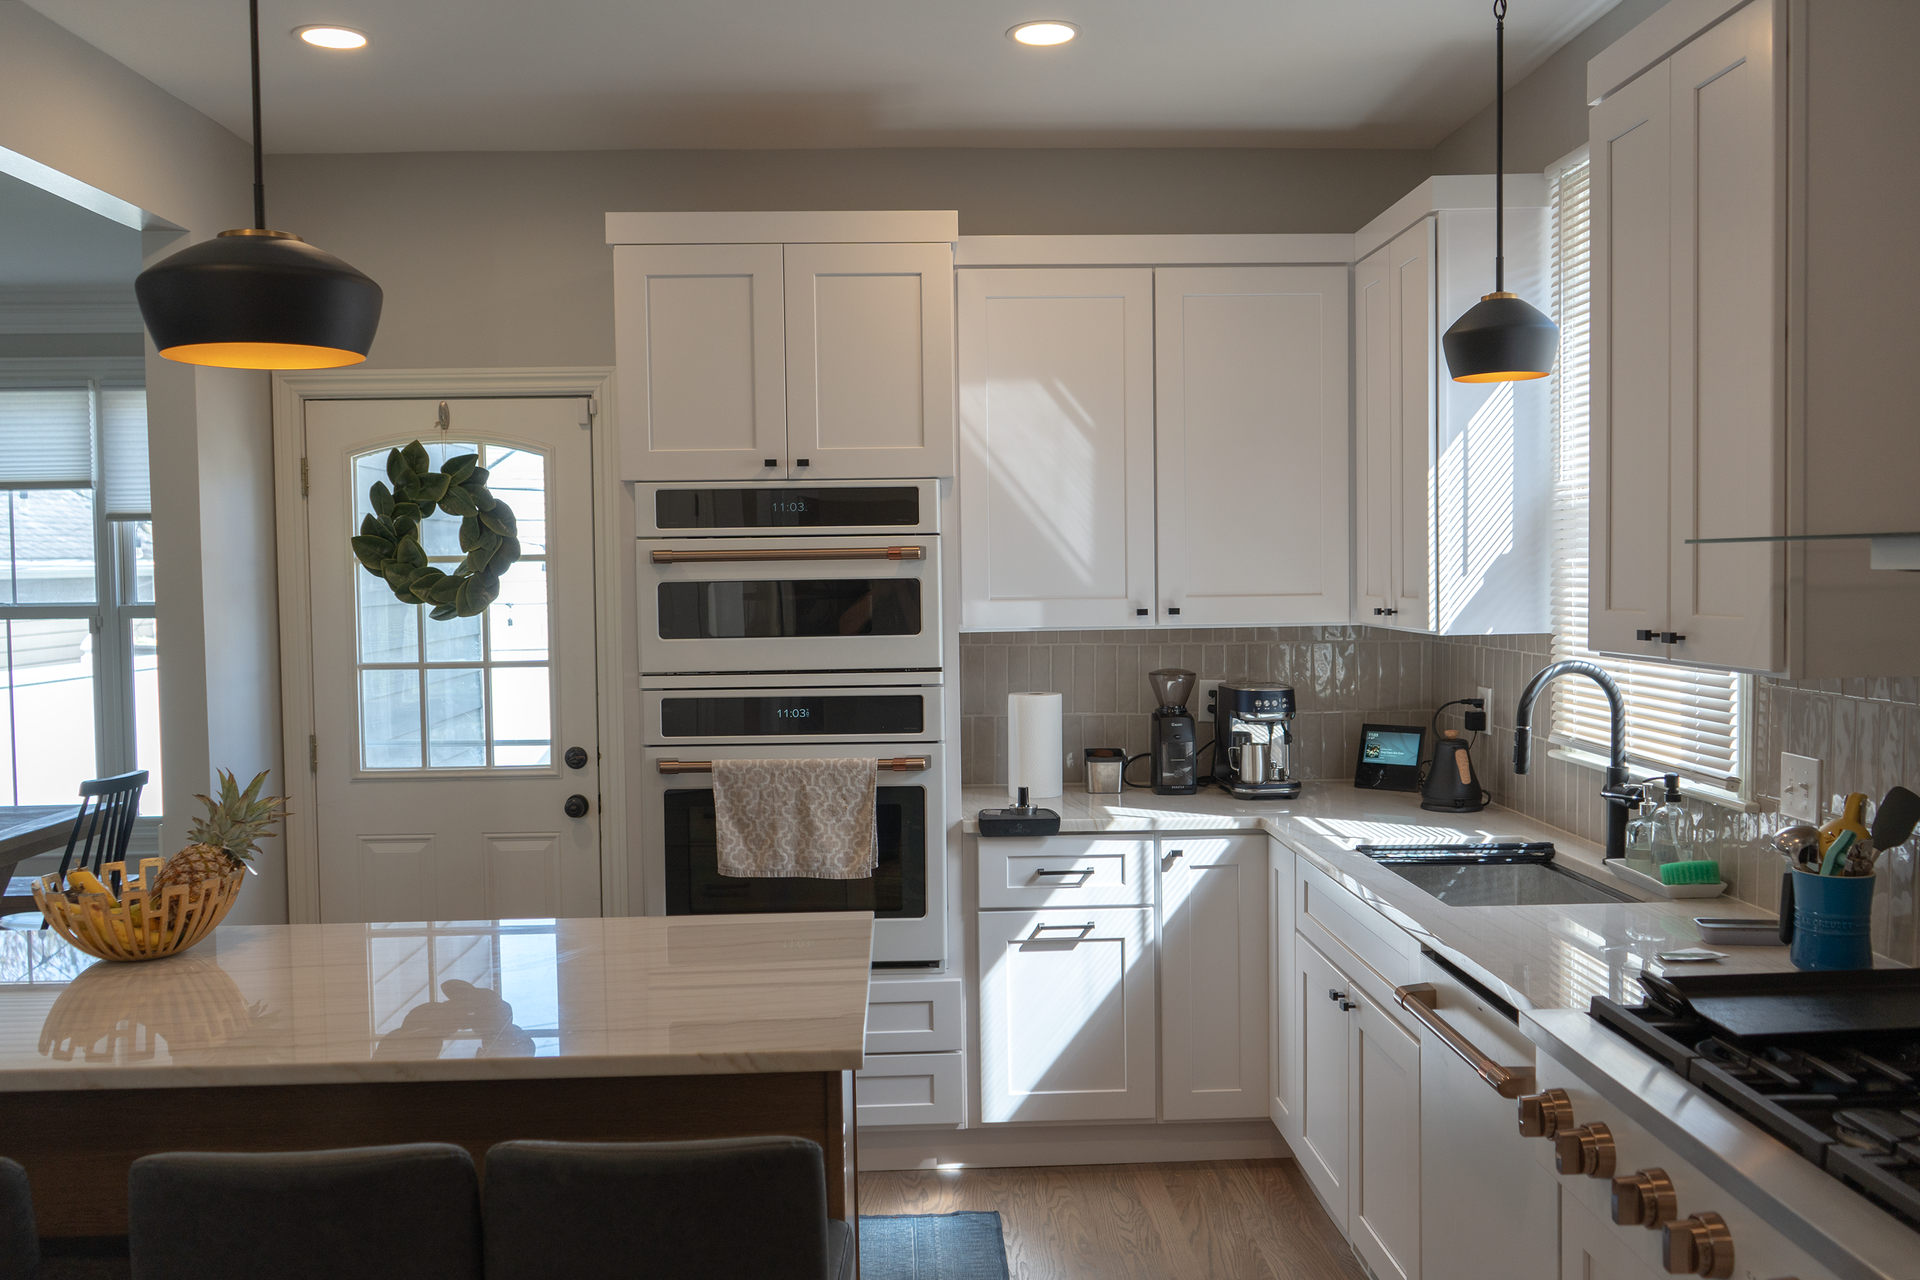 A kitchen with white cabinets, stainless steel appliances, and a wreath on the door.